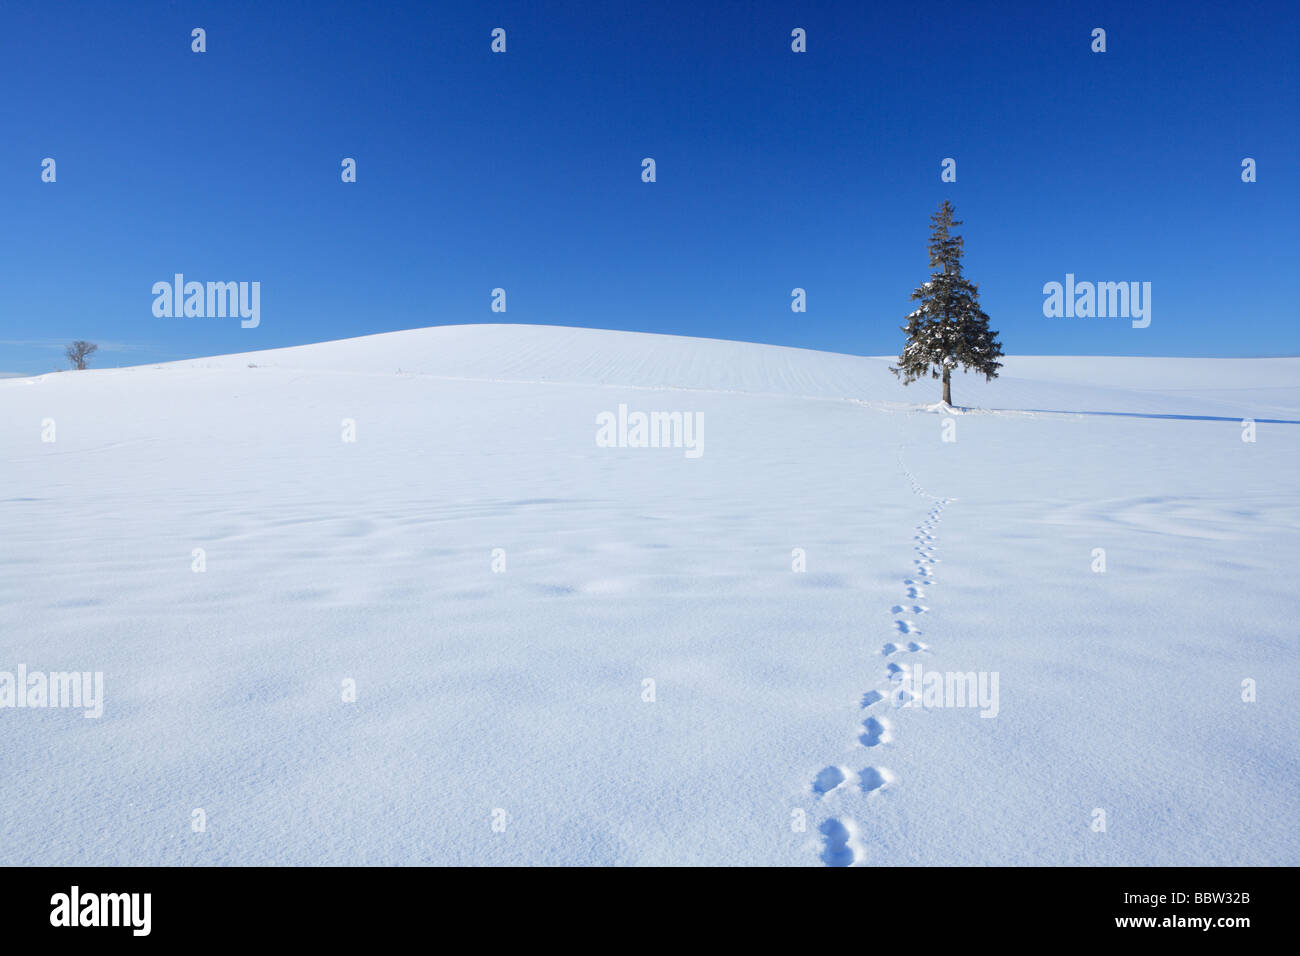 Footmarks leading to tree in a snowfield Stock Photo